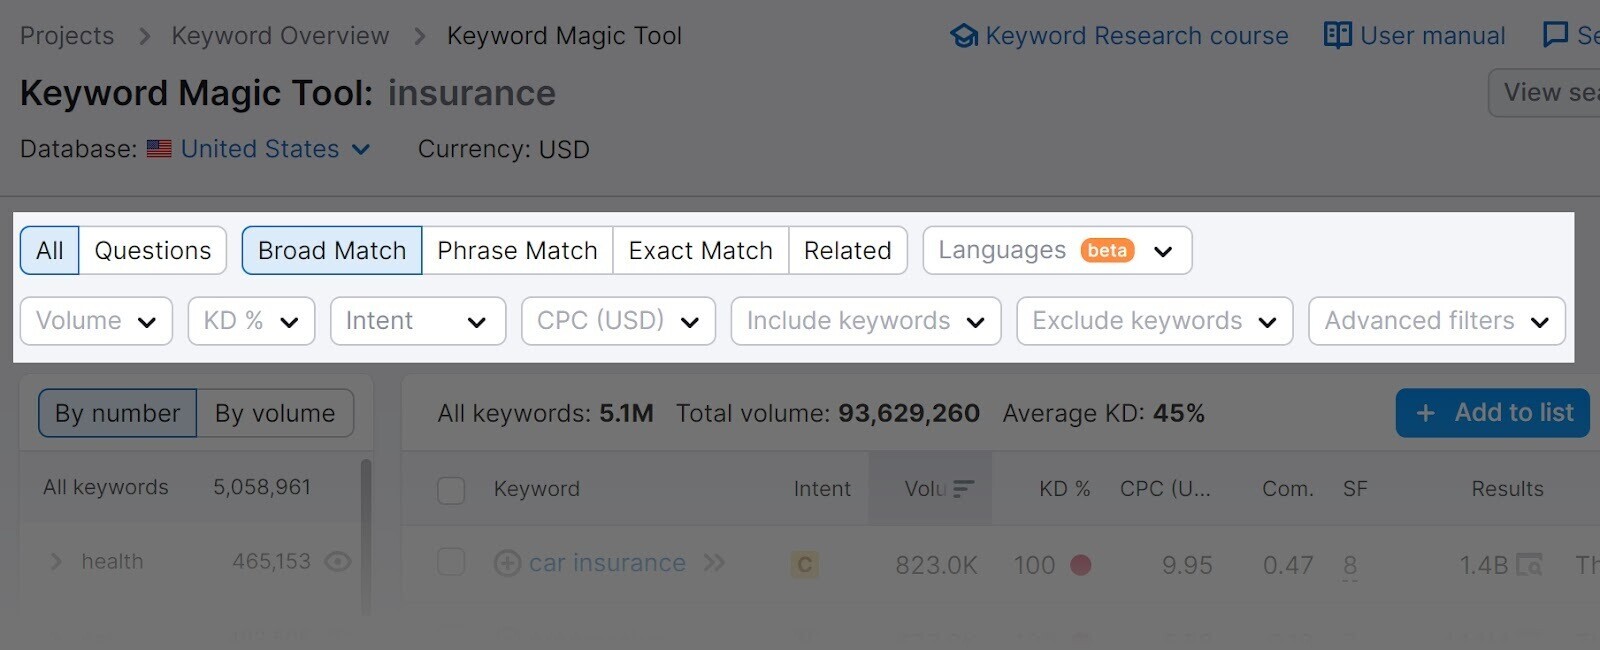 filters in Keyword Magic Tool highlighted